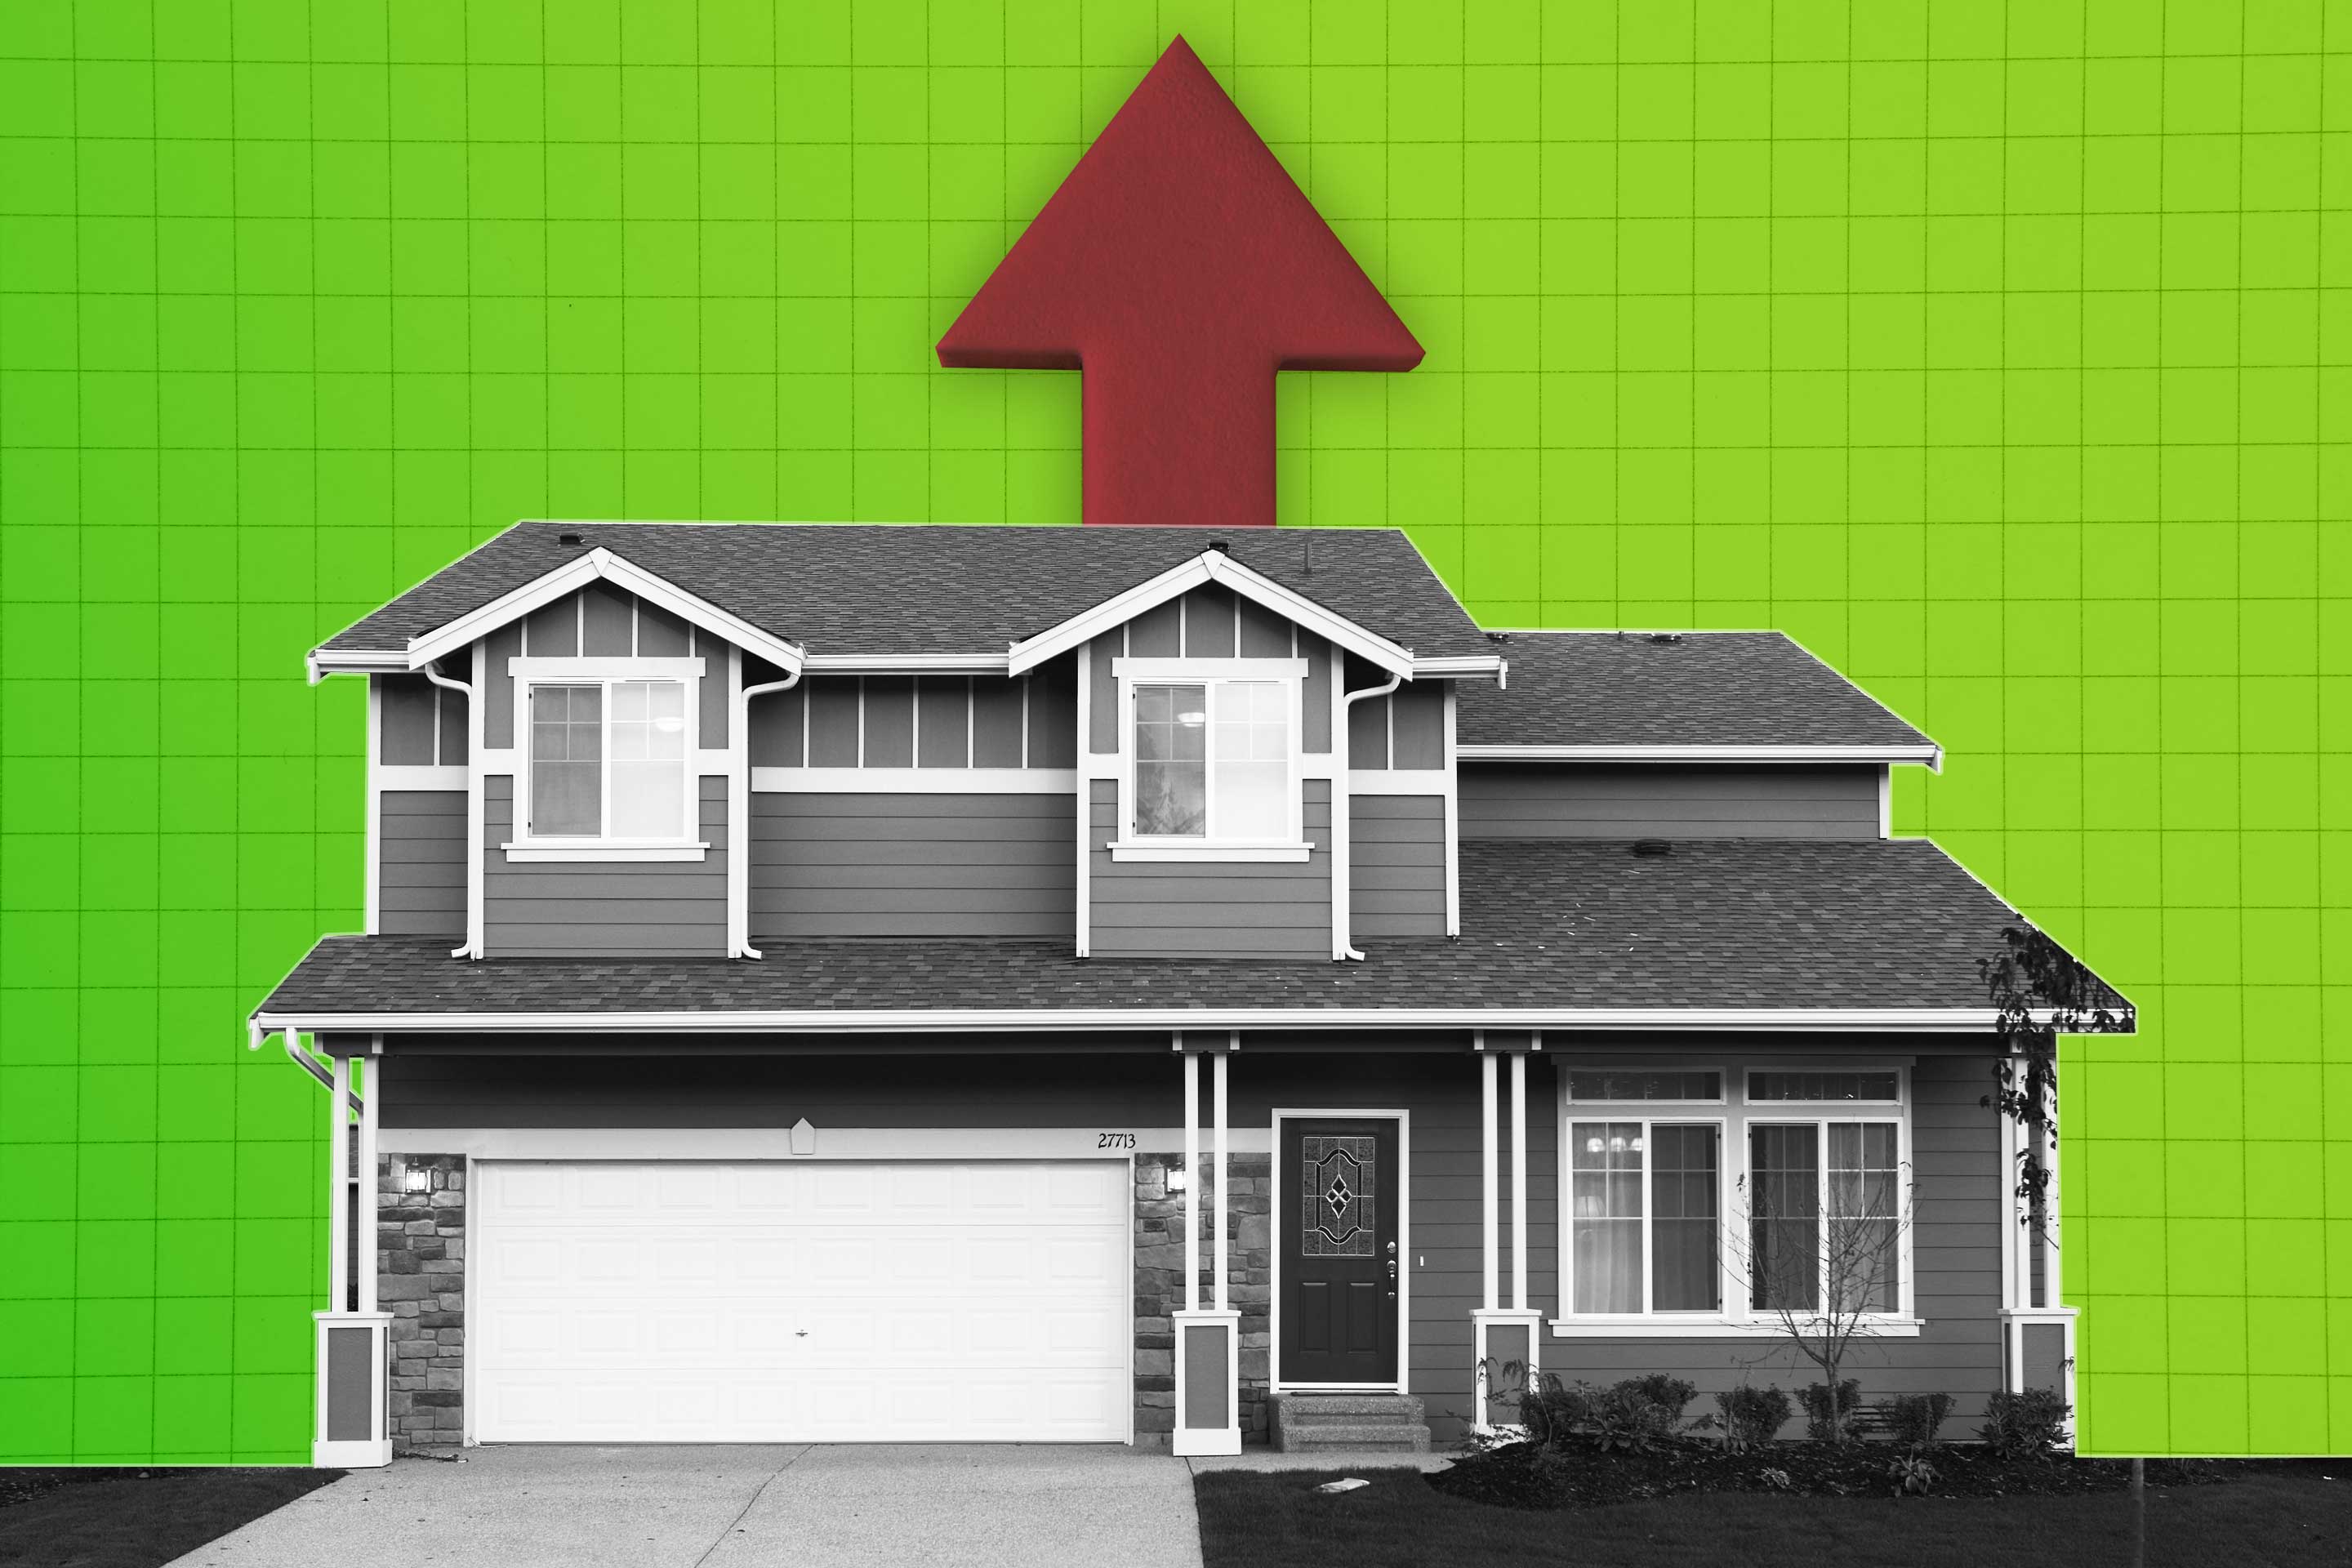 2021 home price growth forecast at a fraction of 2020's rate